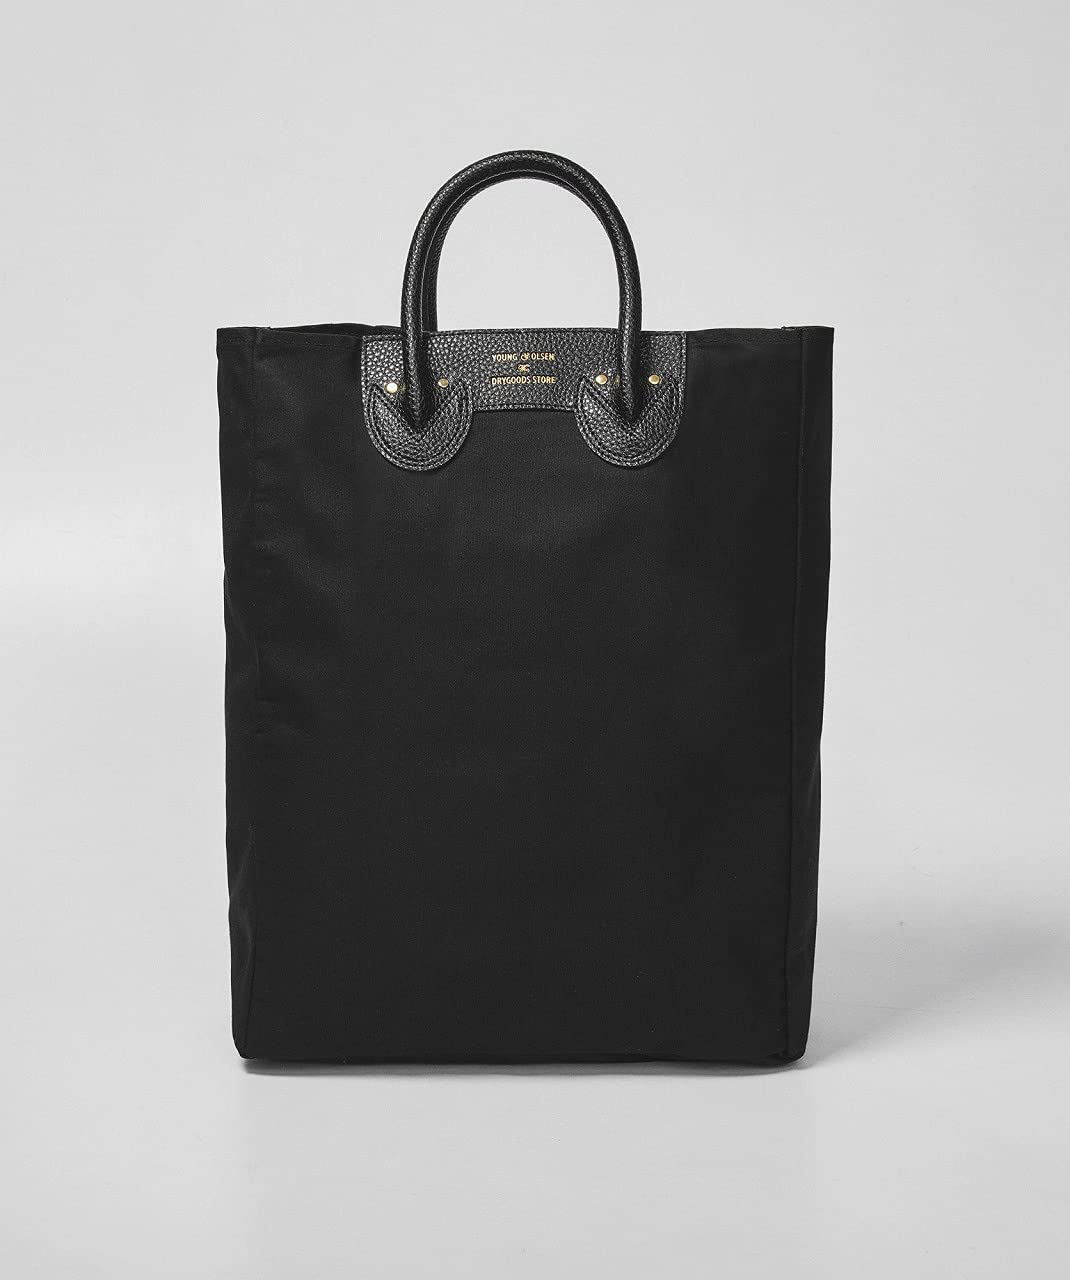 Young And Olsen The Drygoods Store Packable Bag Book Black